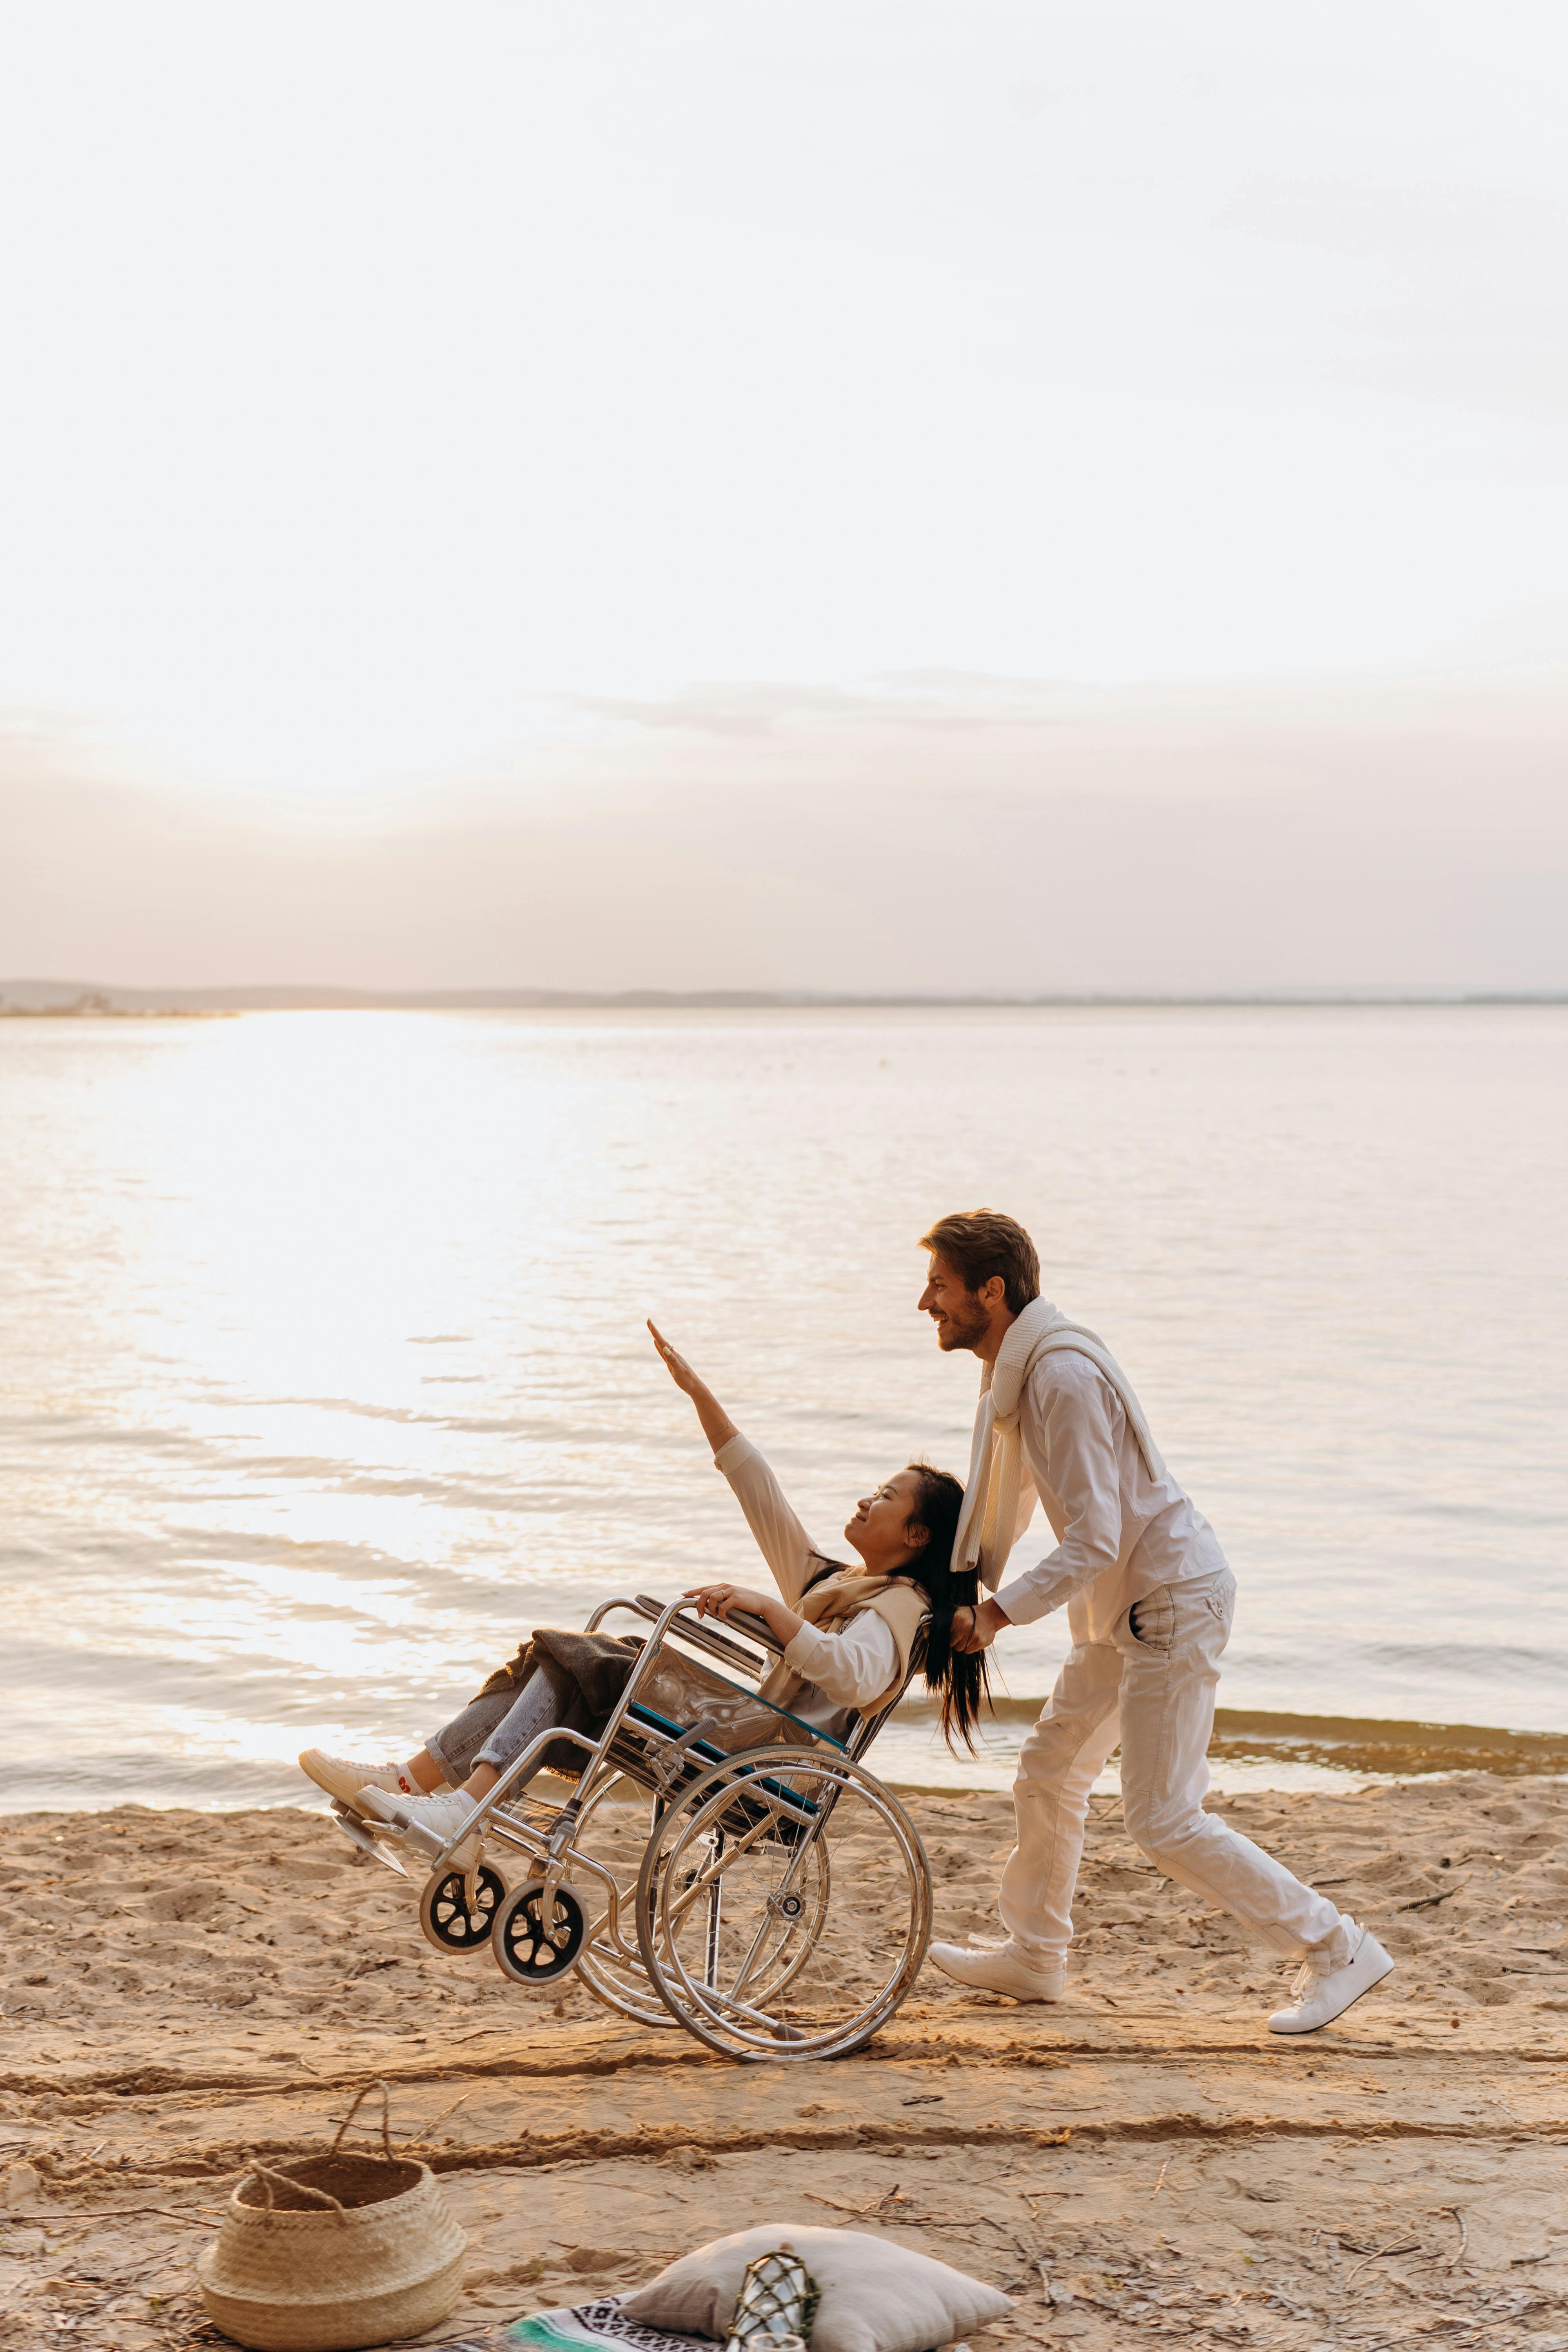 A happy couple on the beach. For illustration purposes only | Source: Pexels